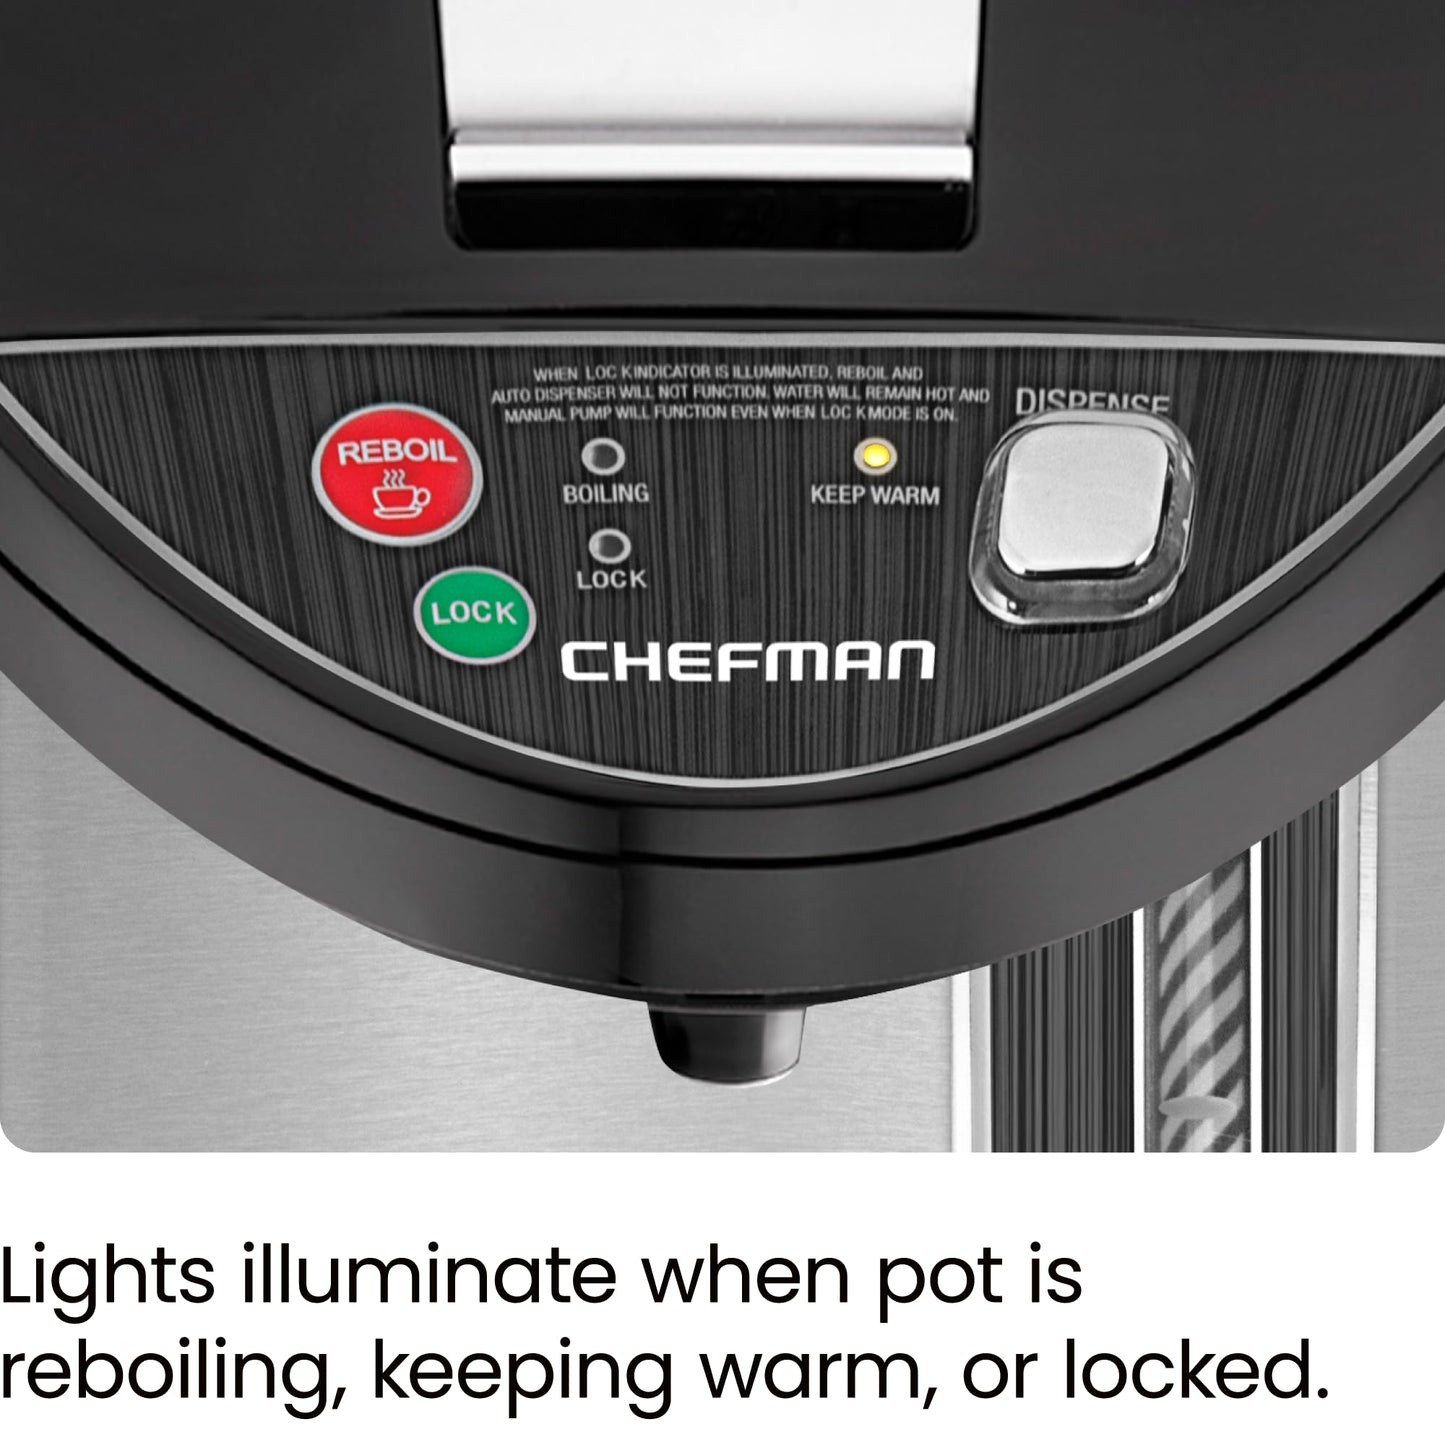 Chefman Electric Hot Water Pot Urn w/ Manual Dispense Buttons, Safety Lock, Instant Heating for Coffee & Tea, Auto-Shutoff/Boil Dry Protection, Insulated Stainless Steel, 5.3L/5.6 Qt/30+ Cups - Like New